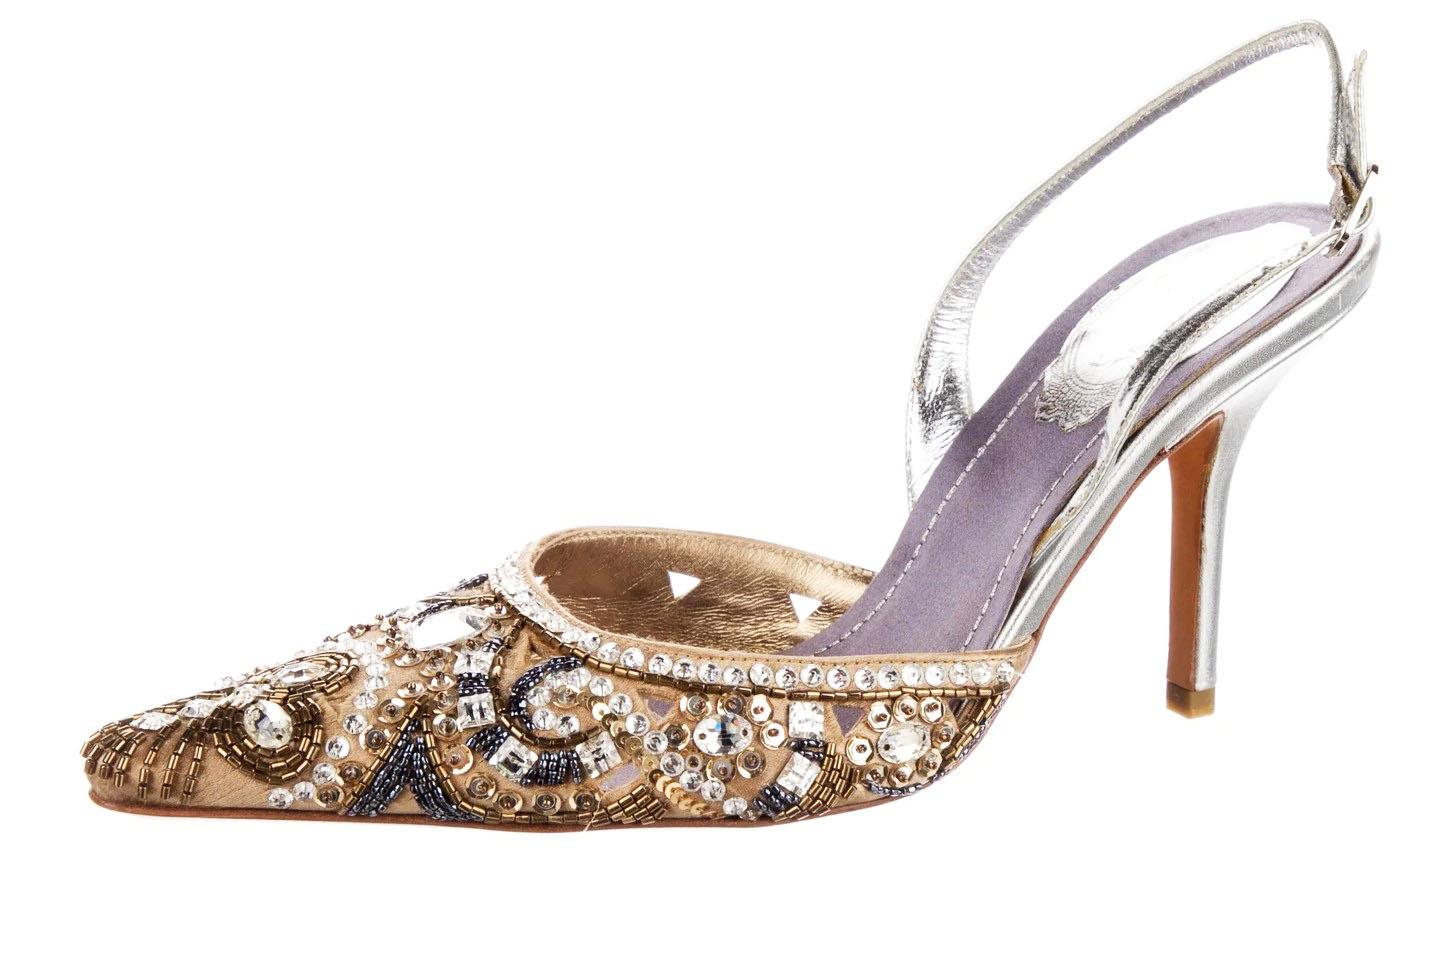 New Rene Caovilla Fully Embellished Sandals
Italian size 36.5 - US 6.5
Gold, Blue and Clear Beads, Crystals and Sequins Embellishment Over the Nude Color Satin. 
Silver Tone Leather Heel - 3.5 inches , Adjustable Crystal Embellished Buckle Closure.